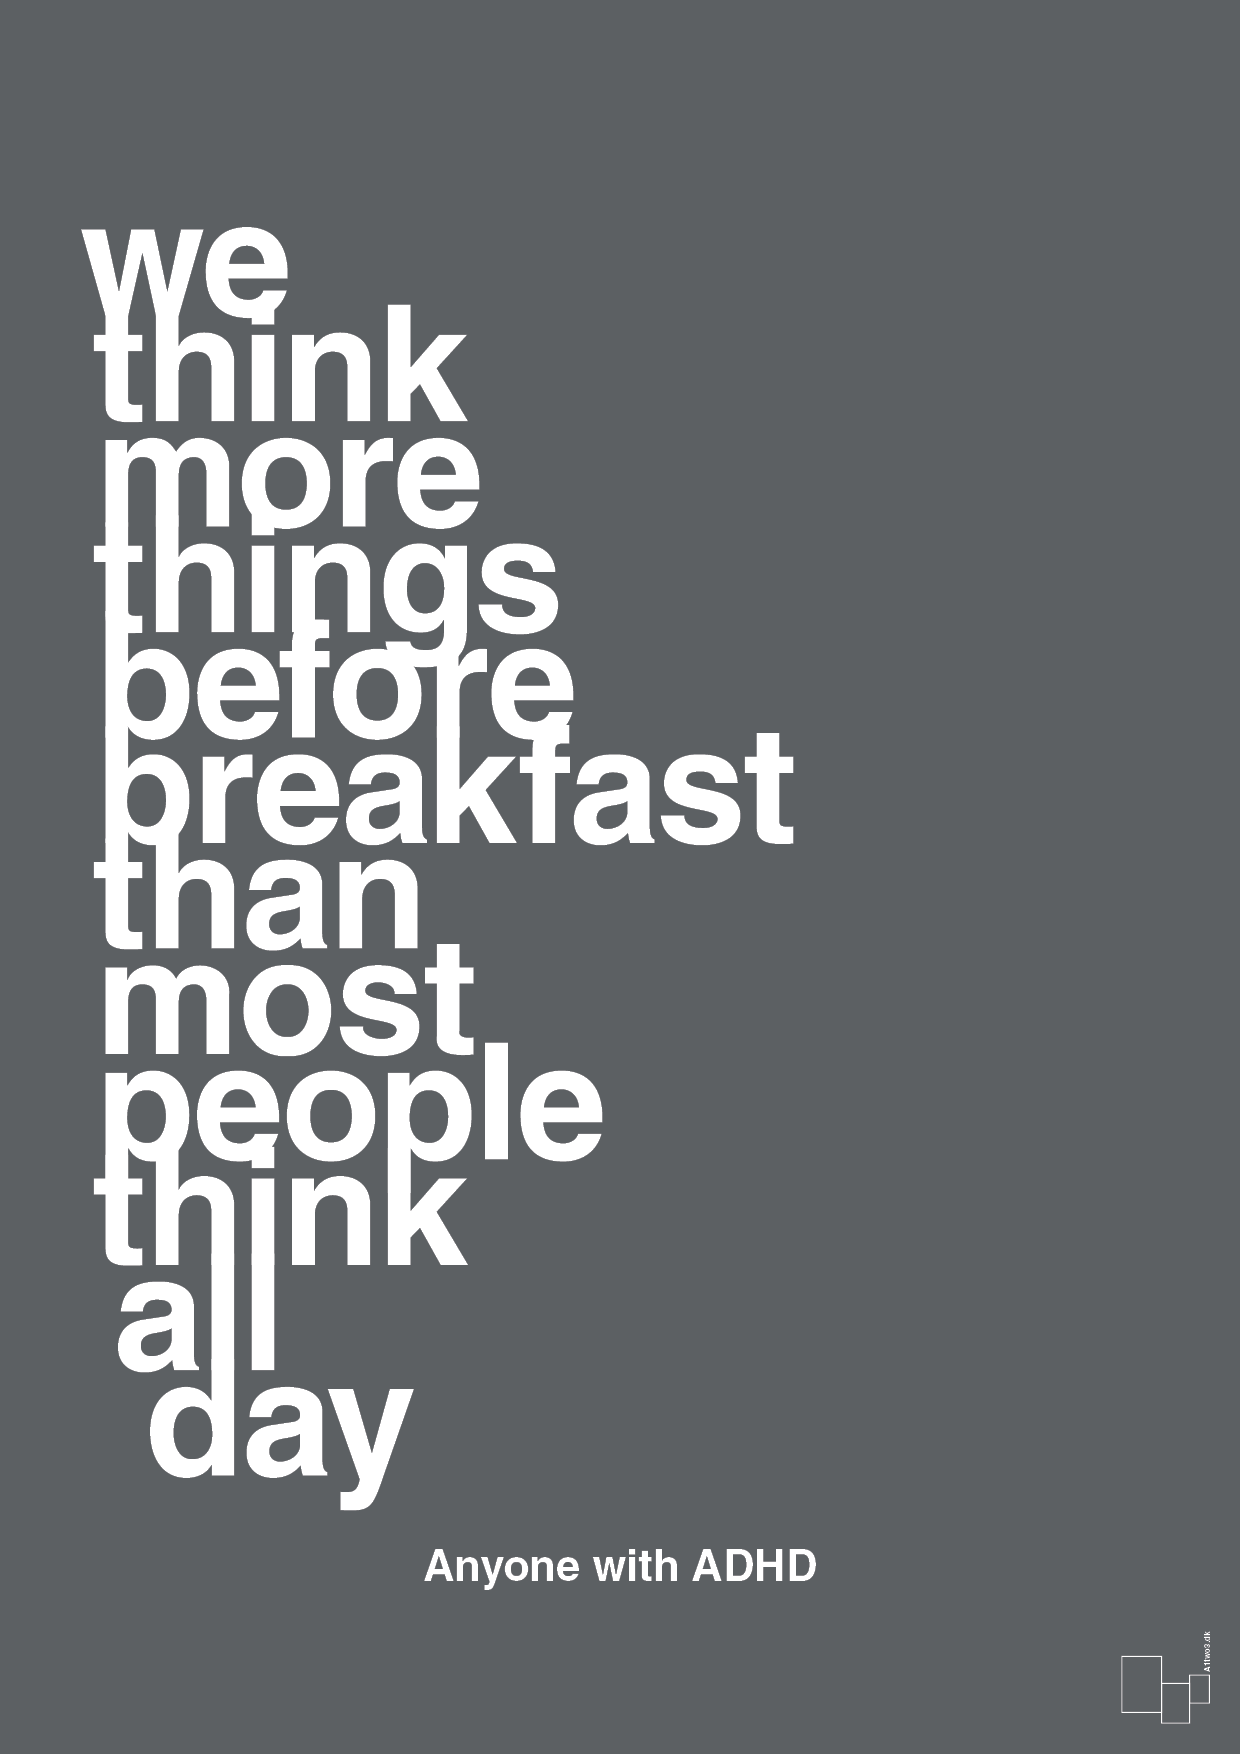 we think more things before breakfast than most people think all day - Plakat med Samfund i Graphic Charcoal